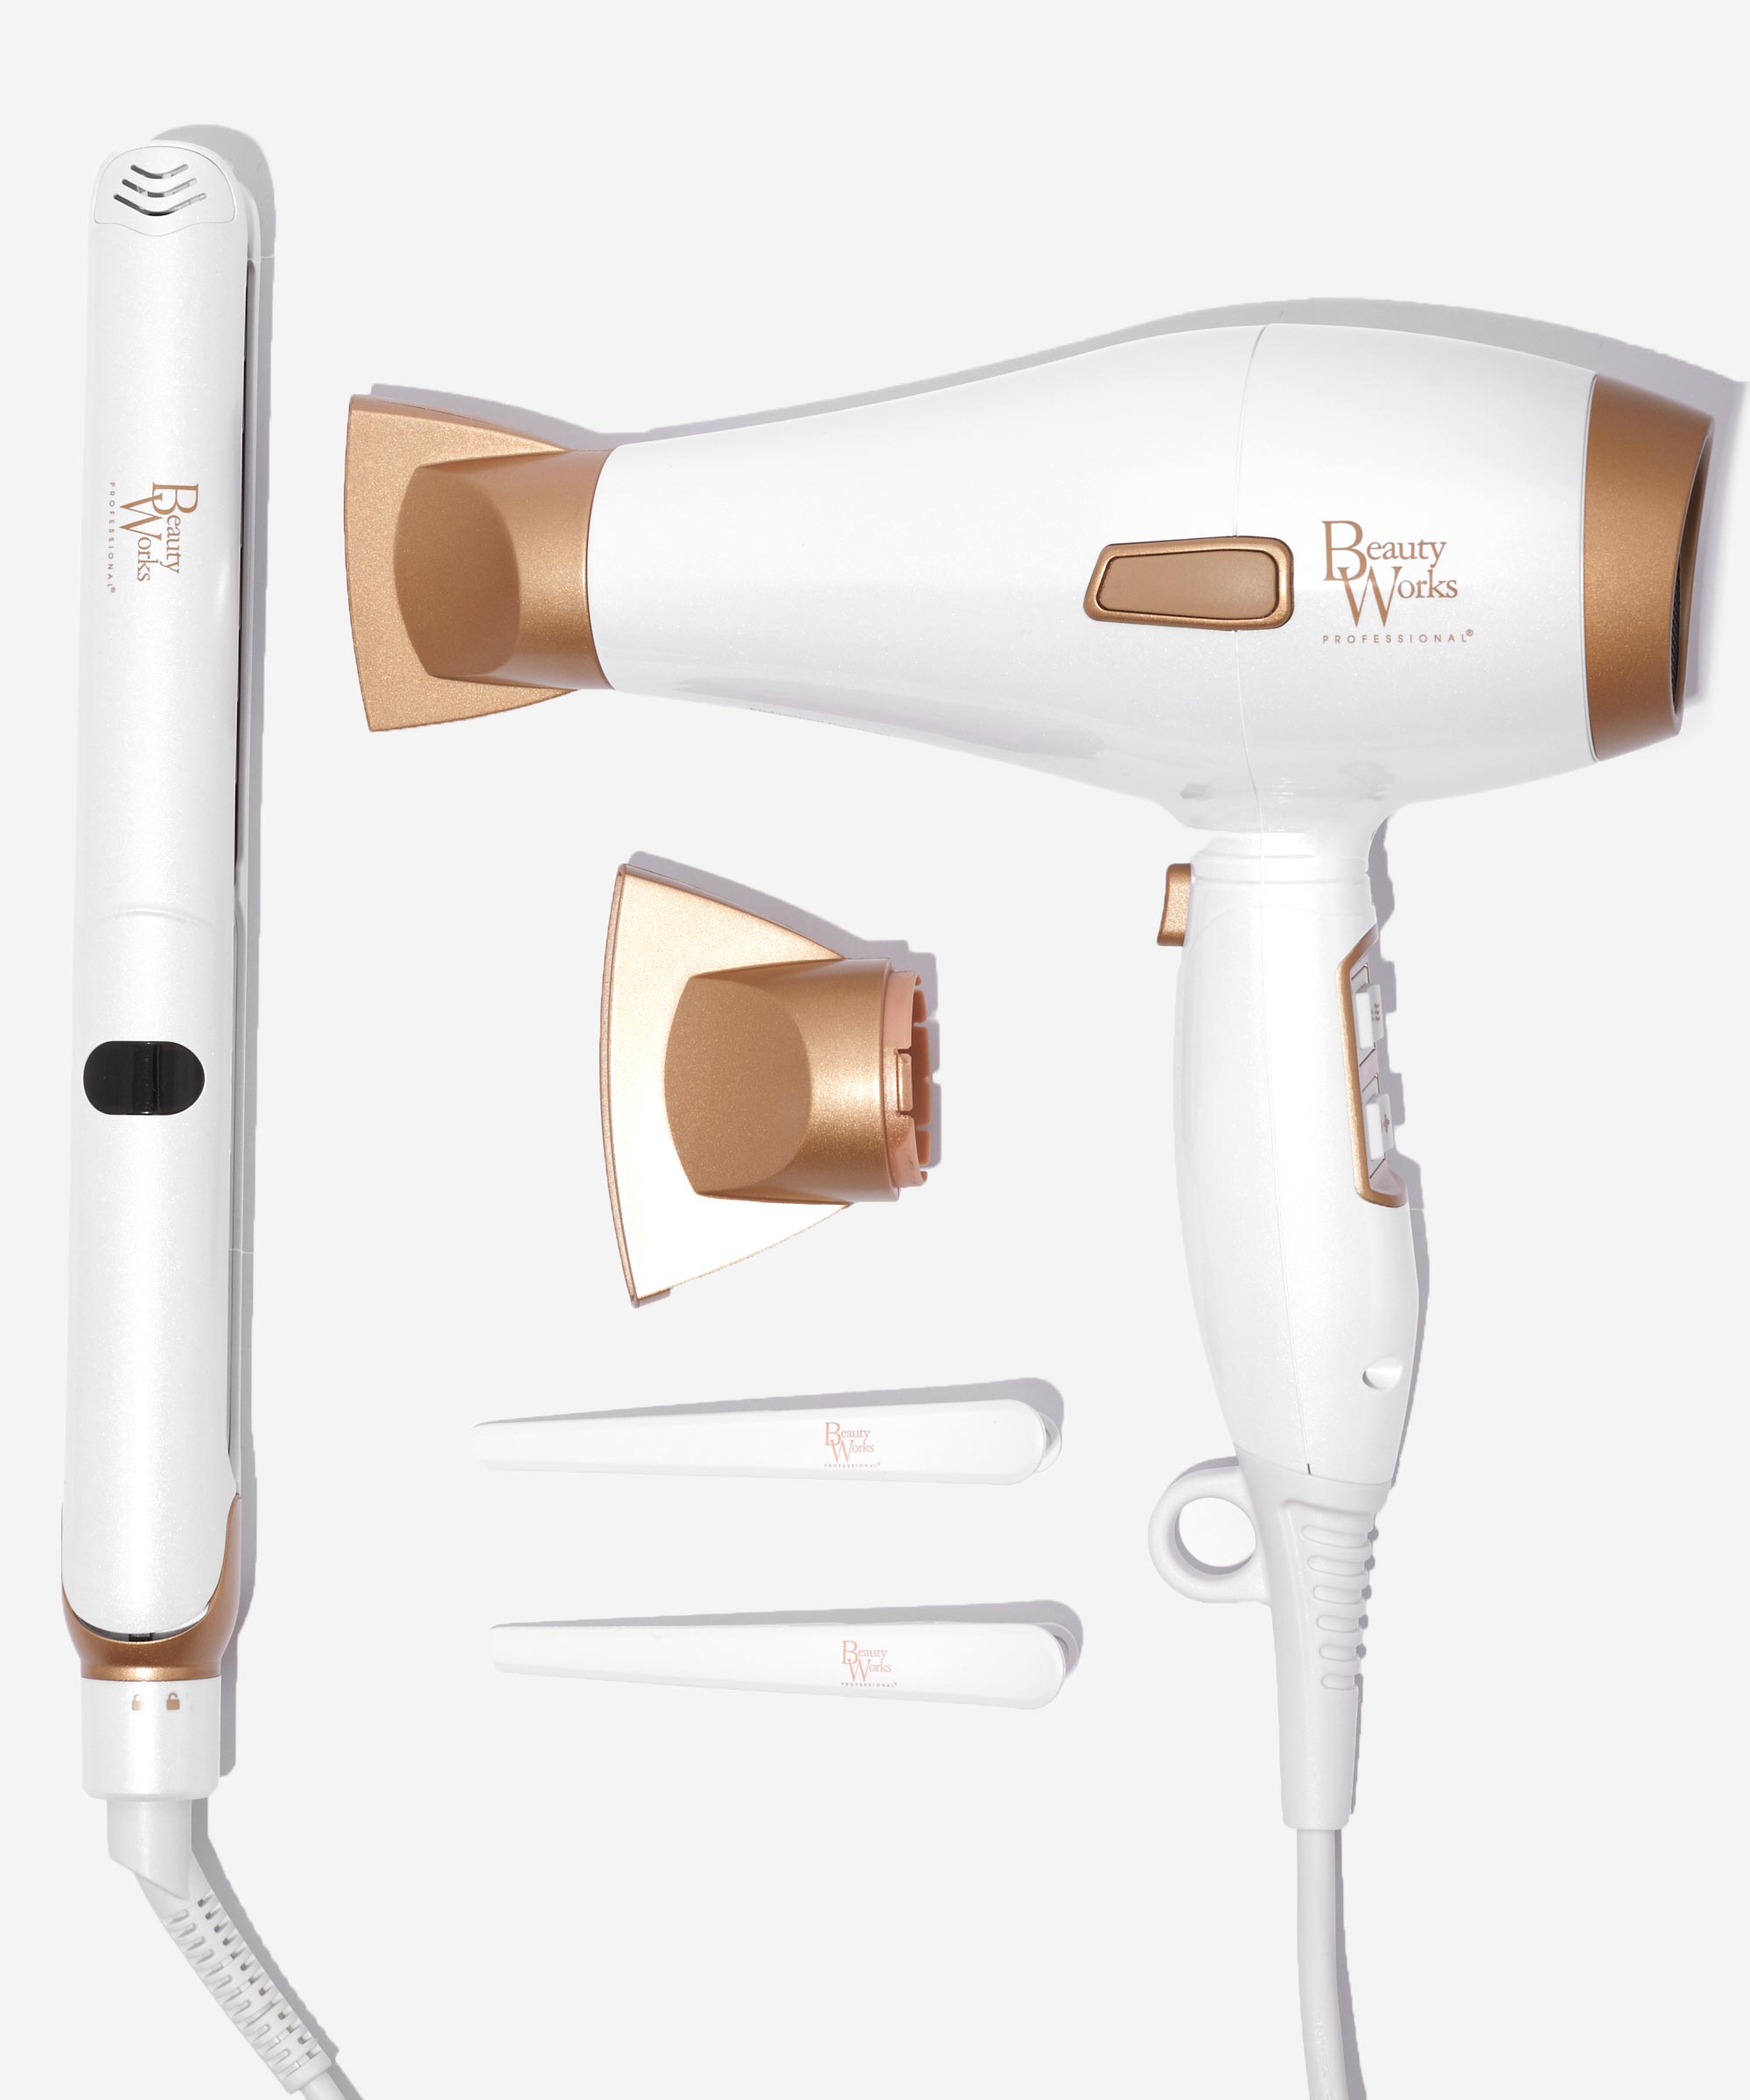 Beauty Works Blow Dry & Style Hair Dryer & Straightener Kit at BEAUTY BAY